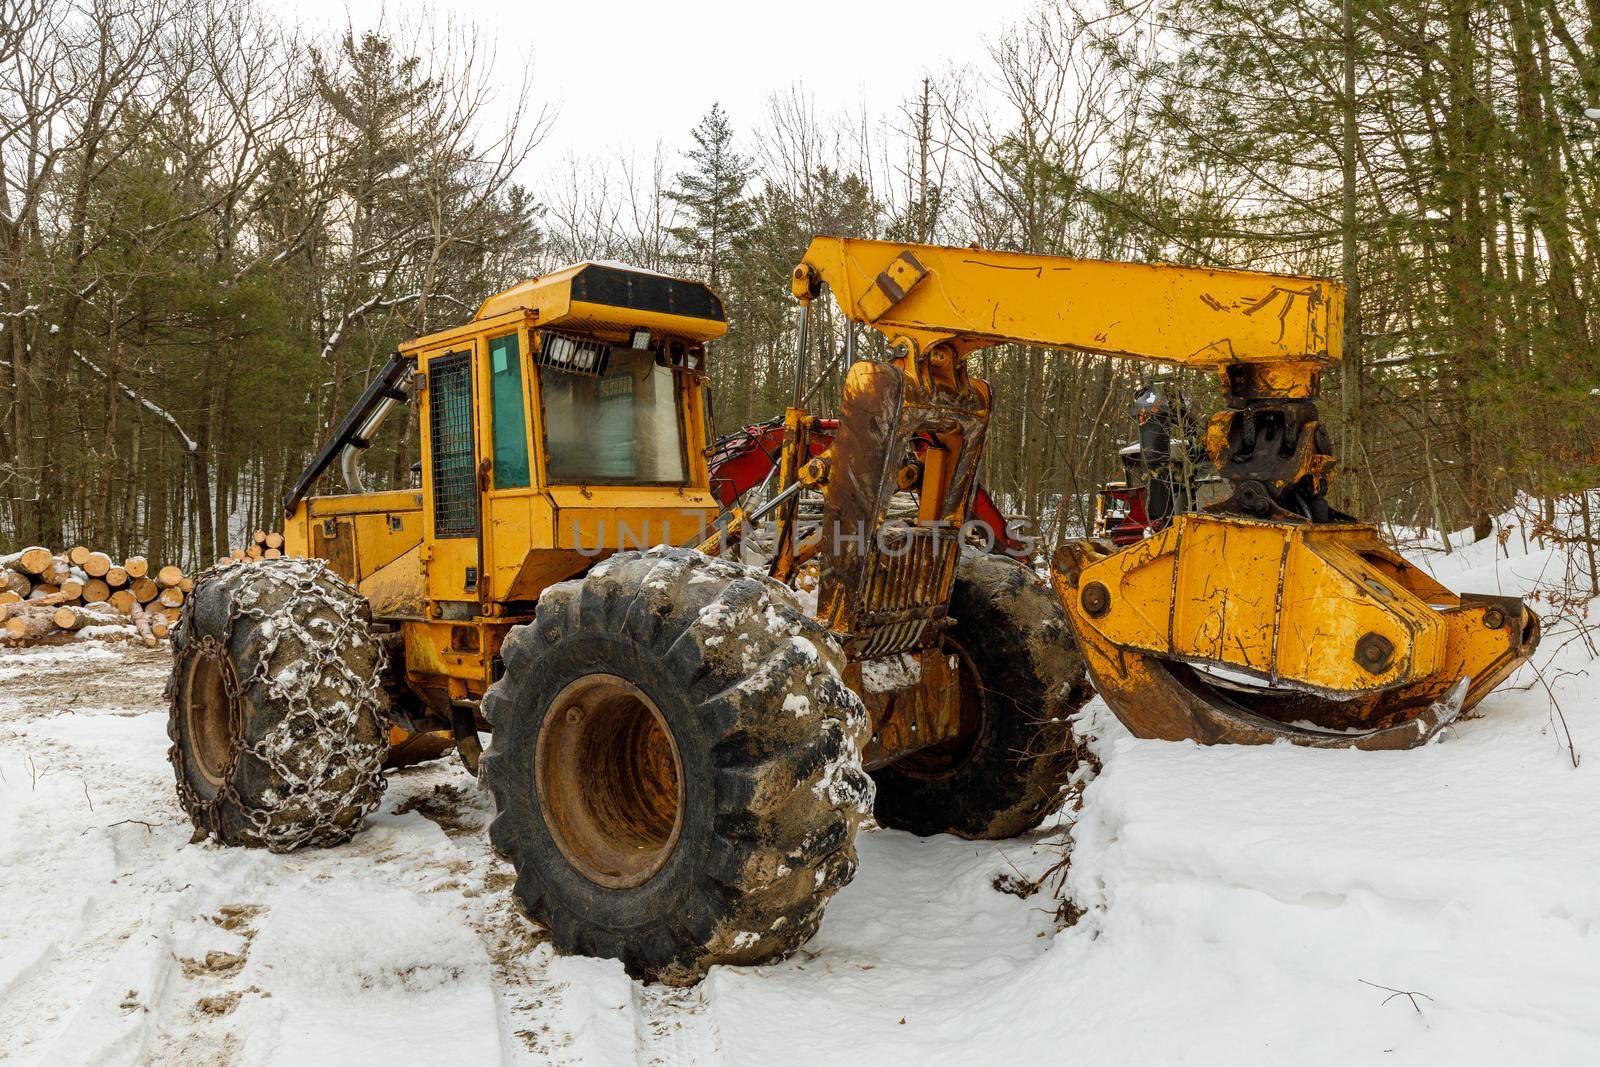 A Yellow Log Skidder Parked in the Snow by markvandam